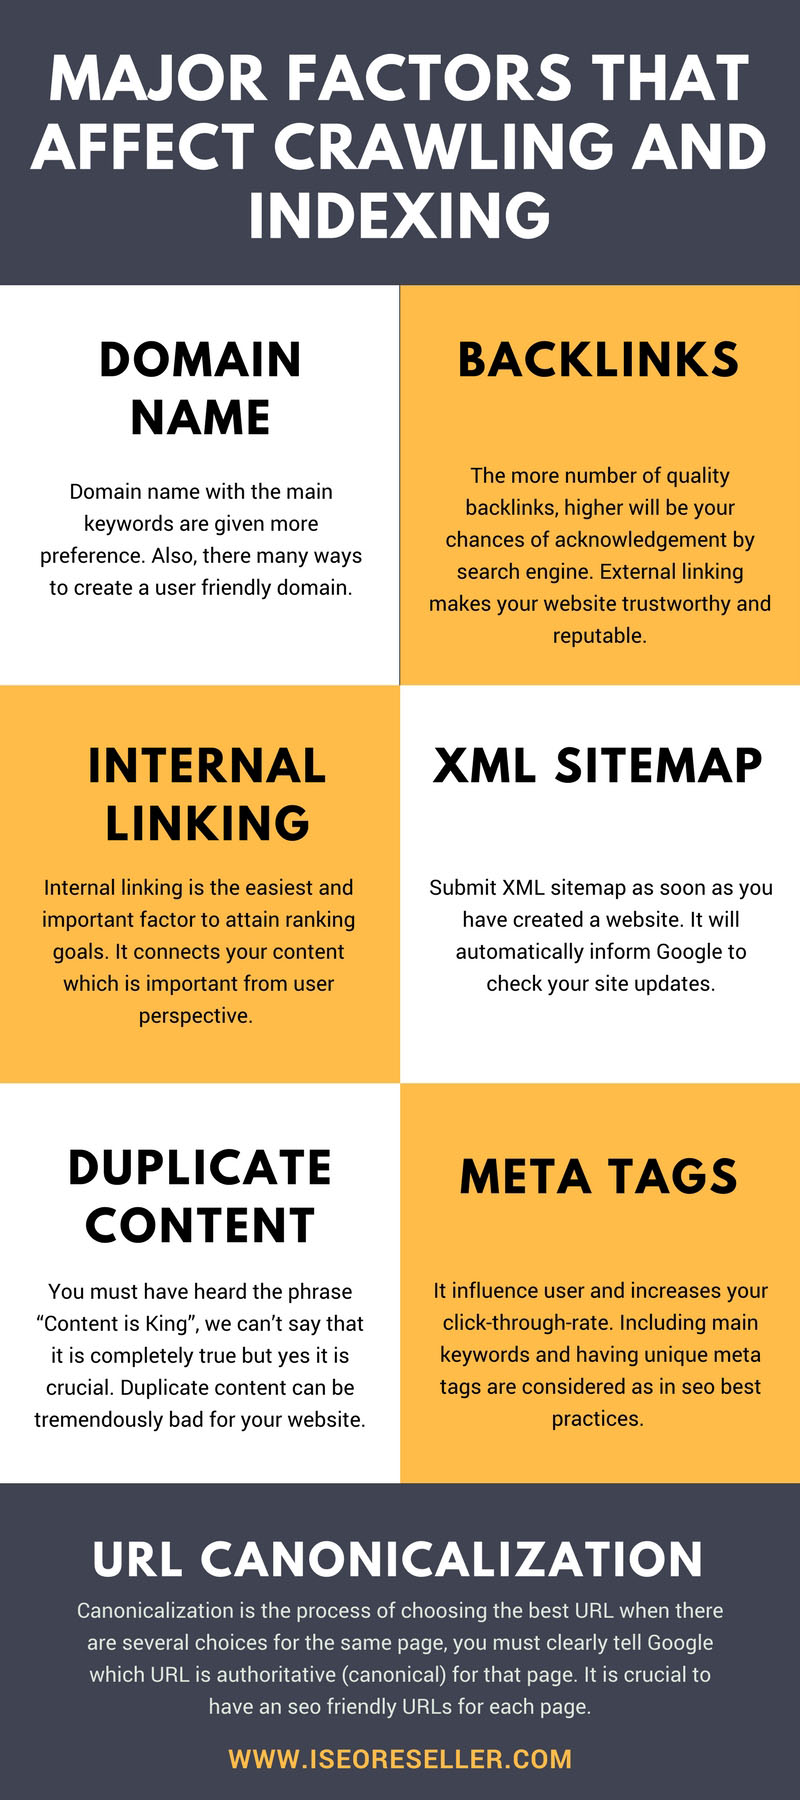 Ultimate Guide to Crawling and Indexing infographic